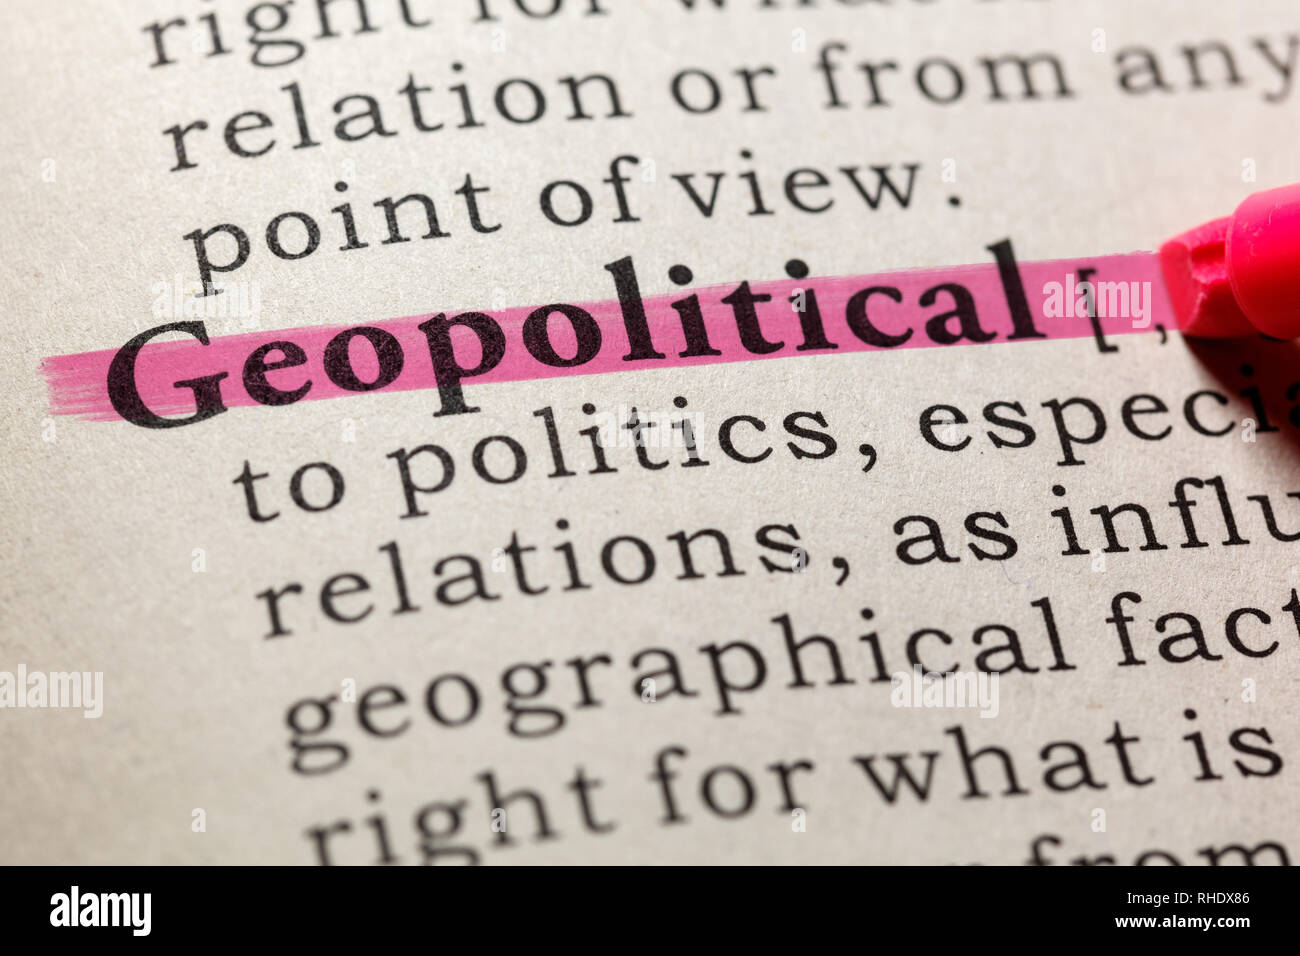 Fake Dictionary, Dictionary definition of the word geopolitical. including key descriptive words. Stock Photo